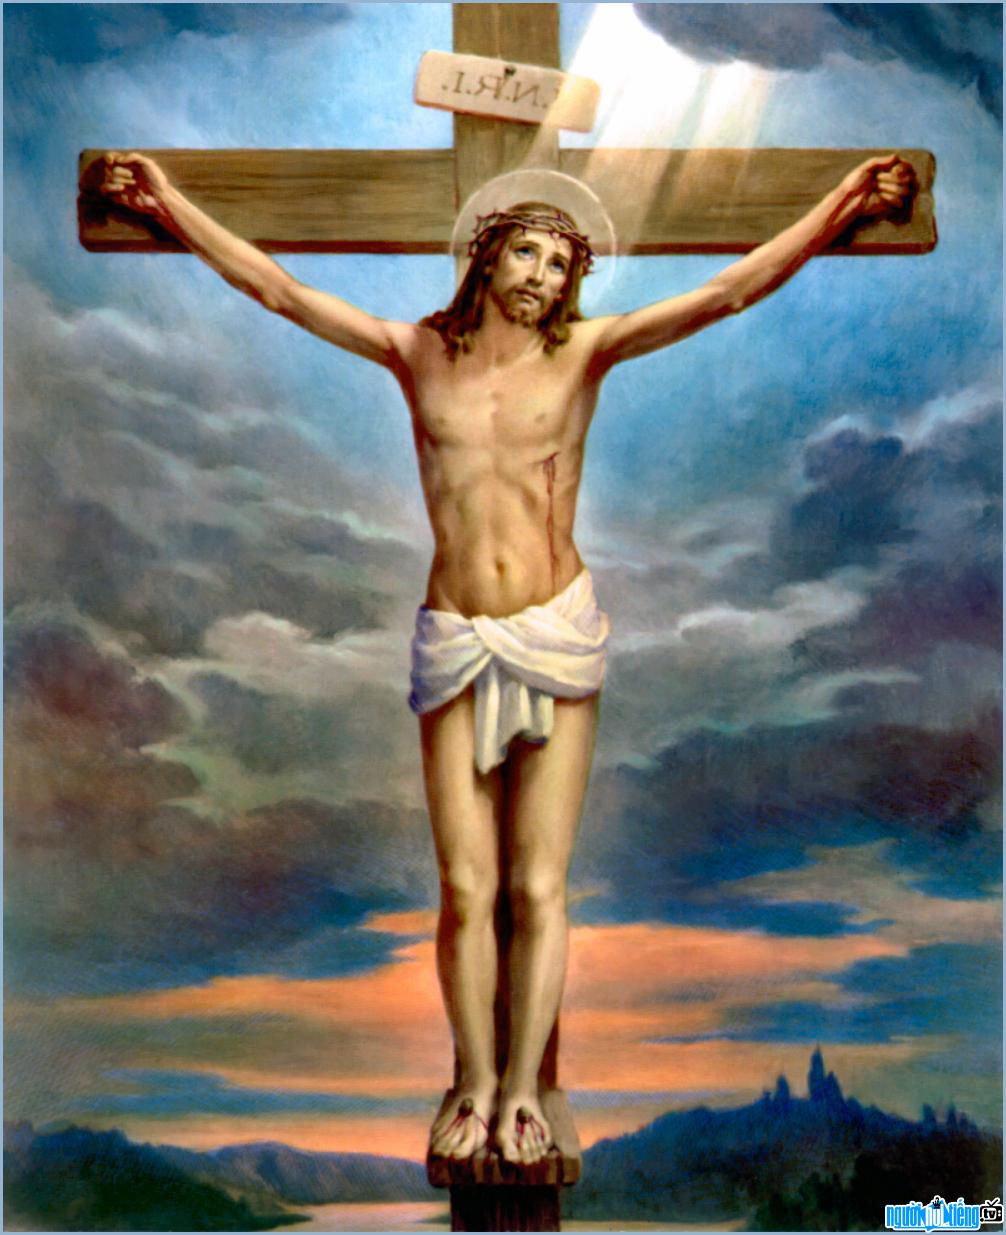  jesus hanging on the cross supposedly to take sins on behalf of humans